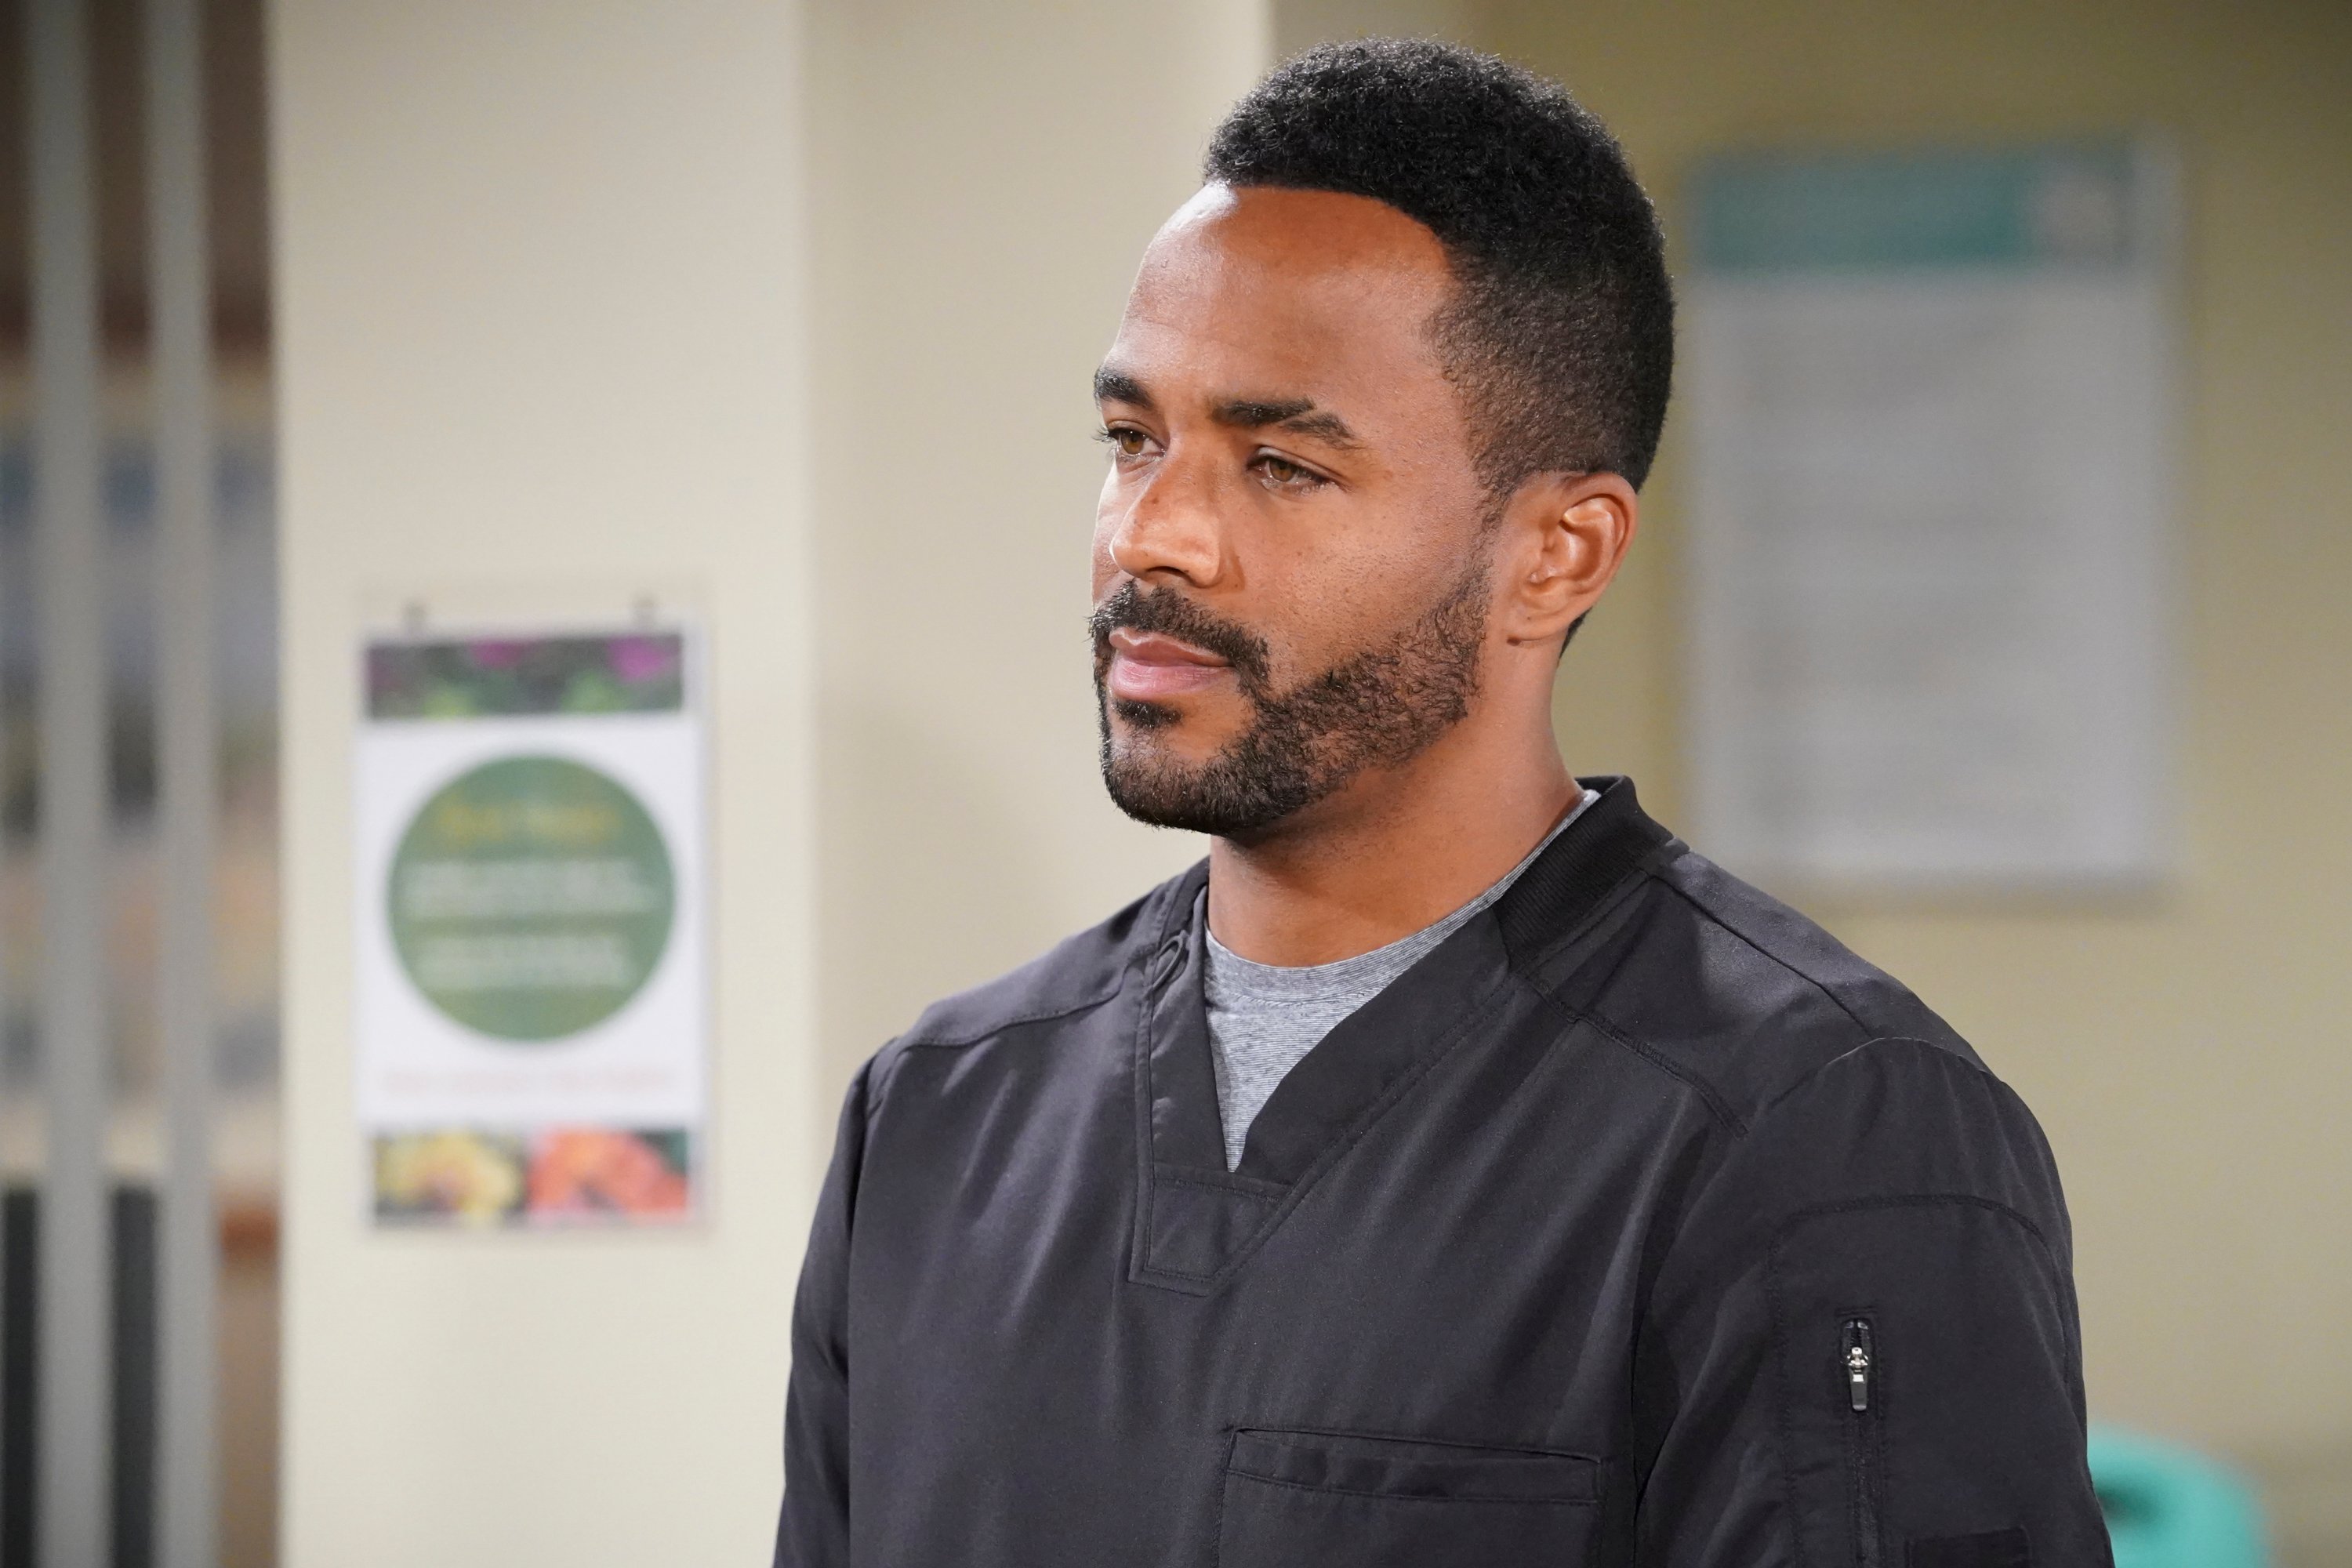 'The Young and the Restless' actor Sean Dominic wearing black scrubs during a hospital scene from the soap opera.